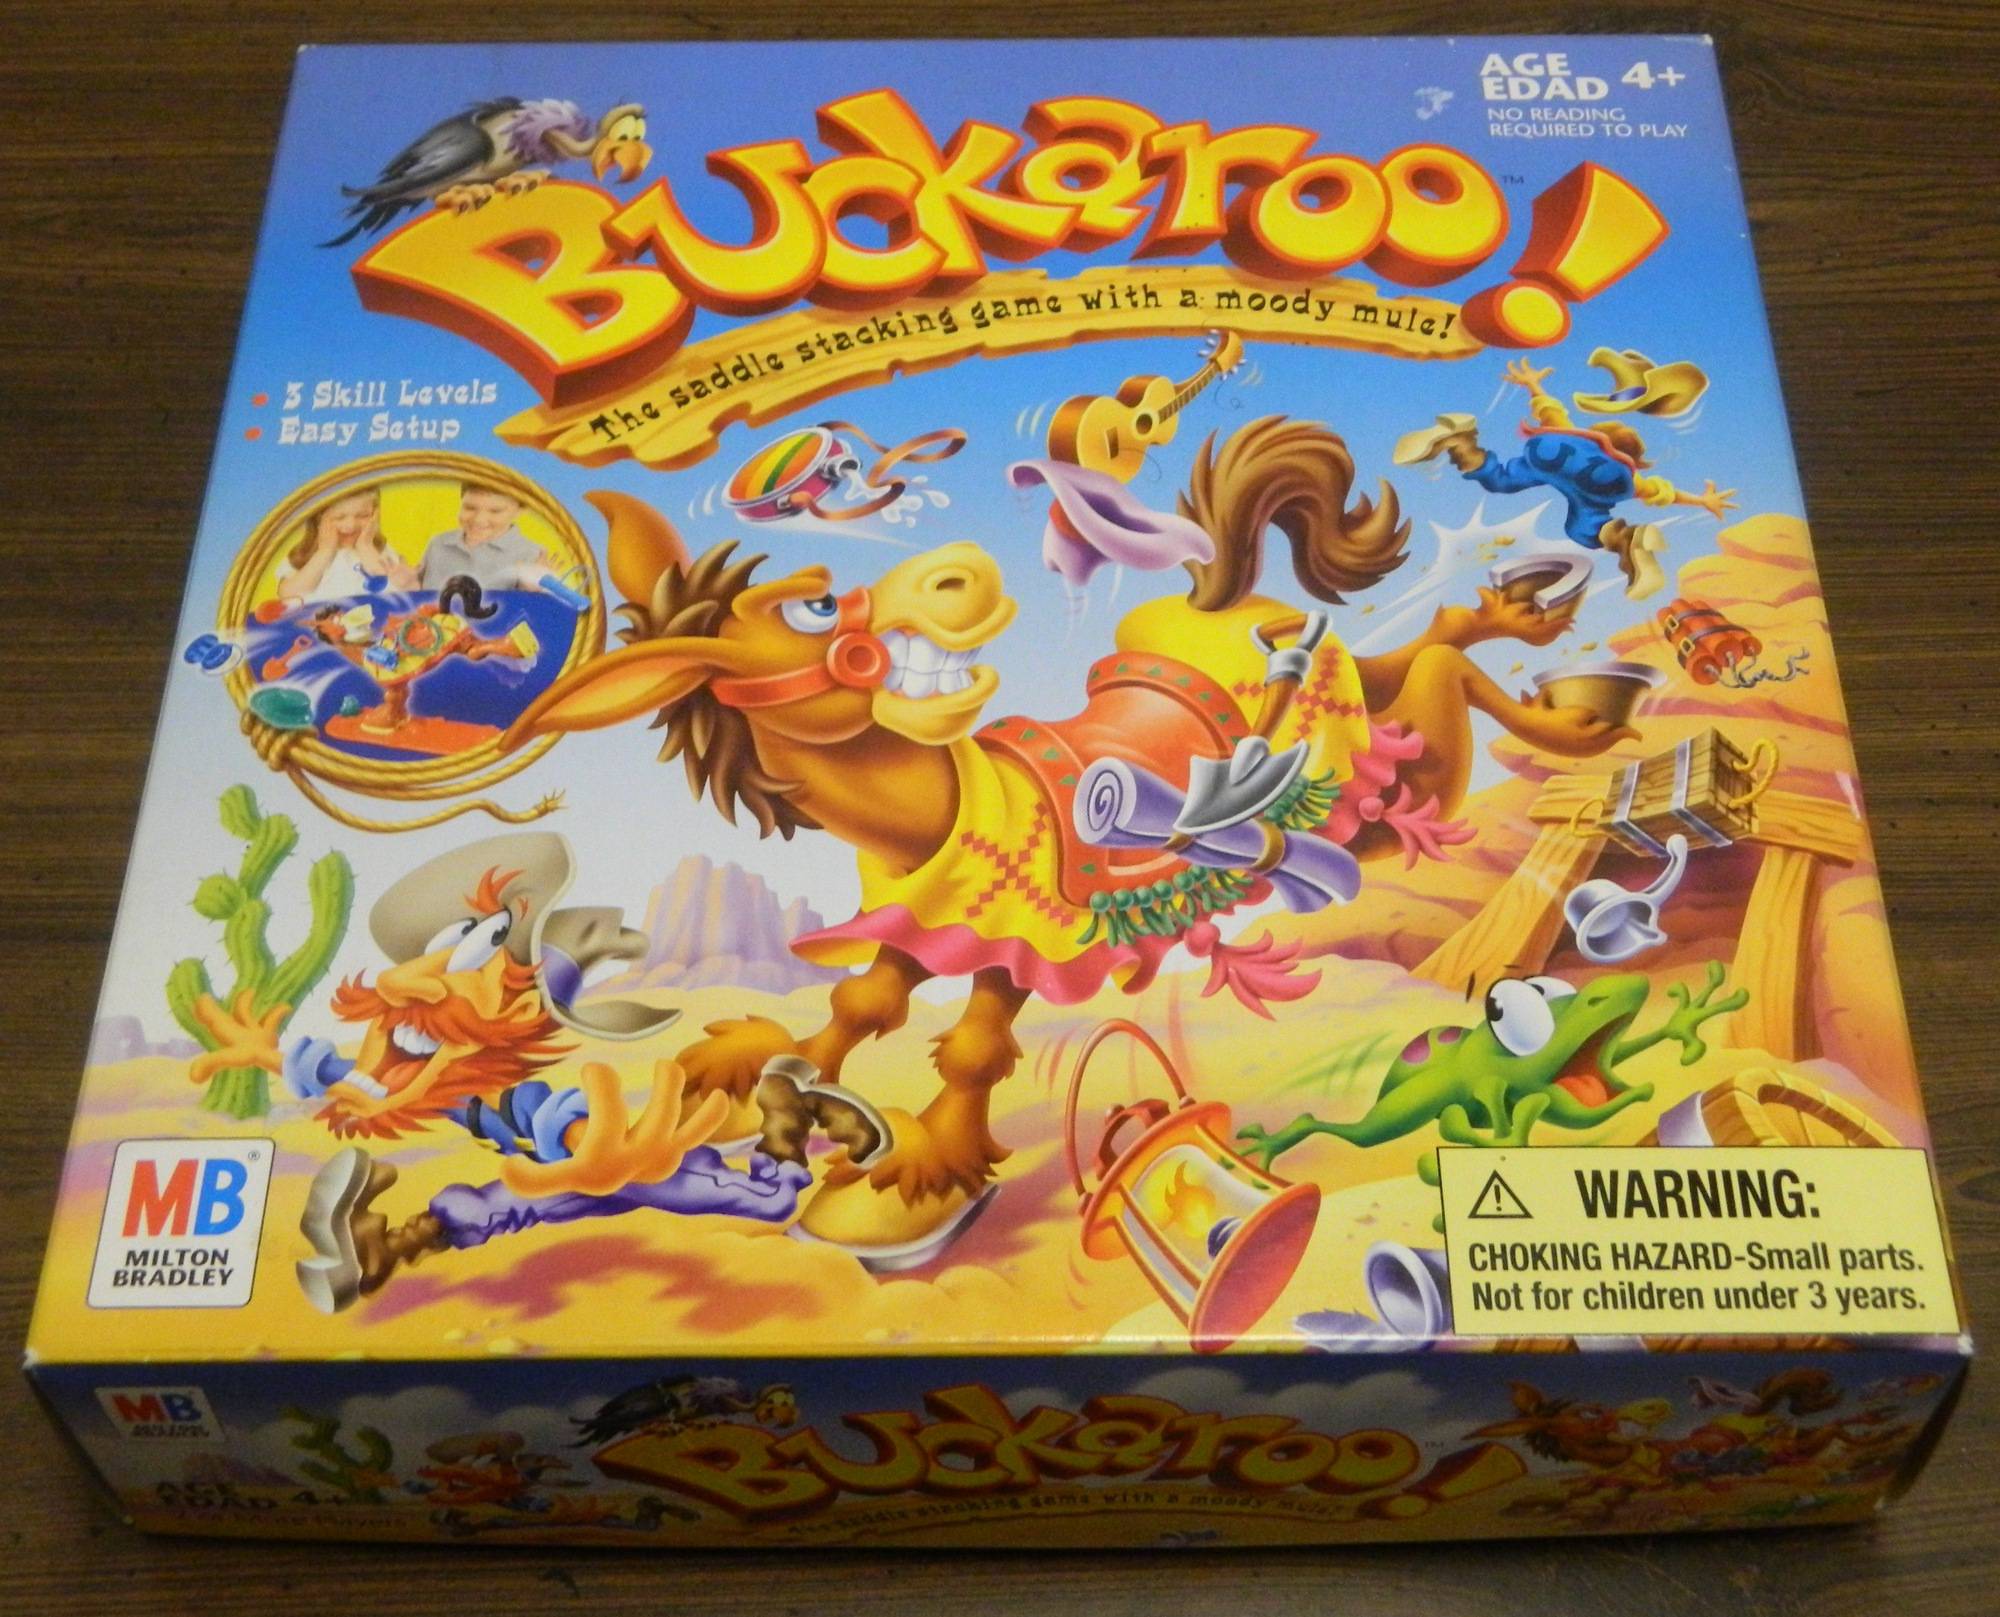 Buckaroo By MB Games Complete and in good condition with instructions . 